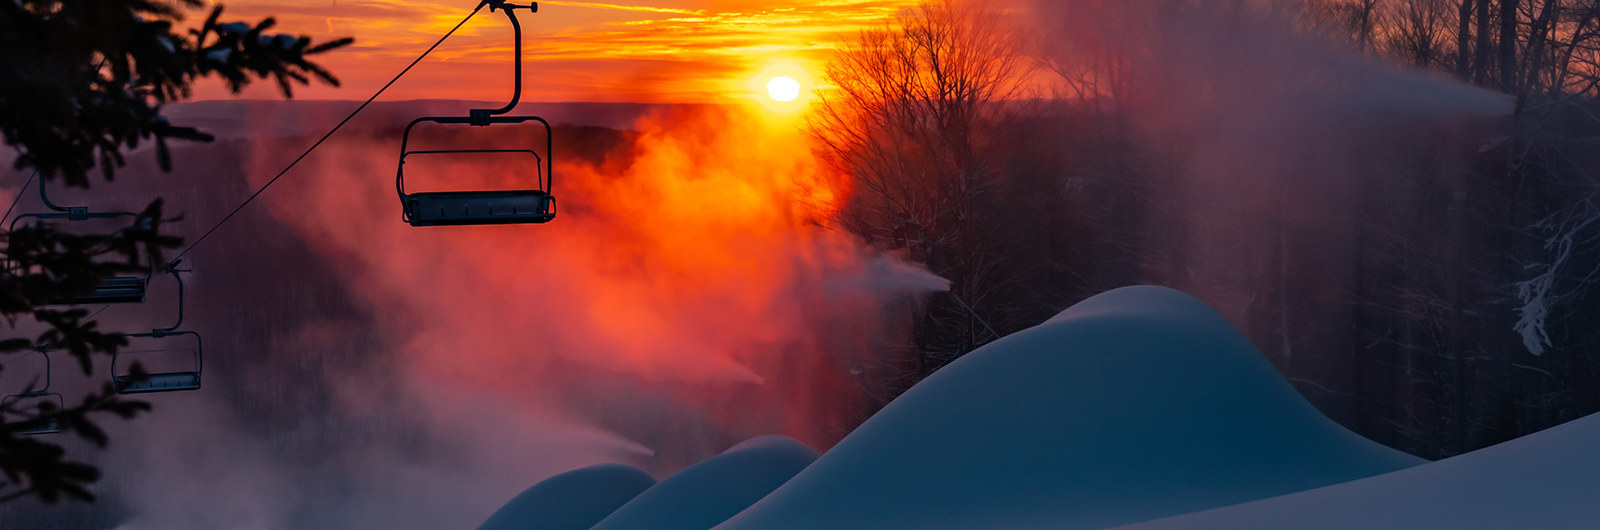 The morning sunrise on Morning Star with snow guns making piles of snow.